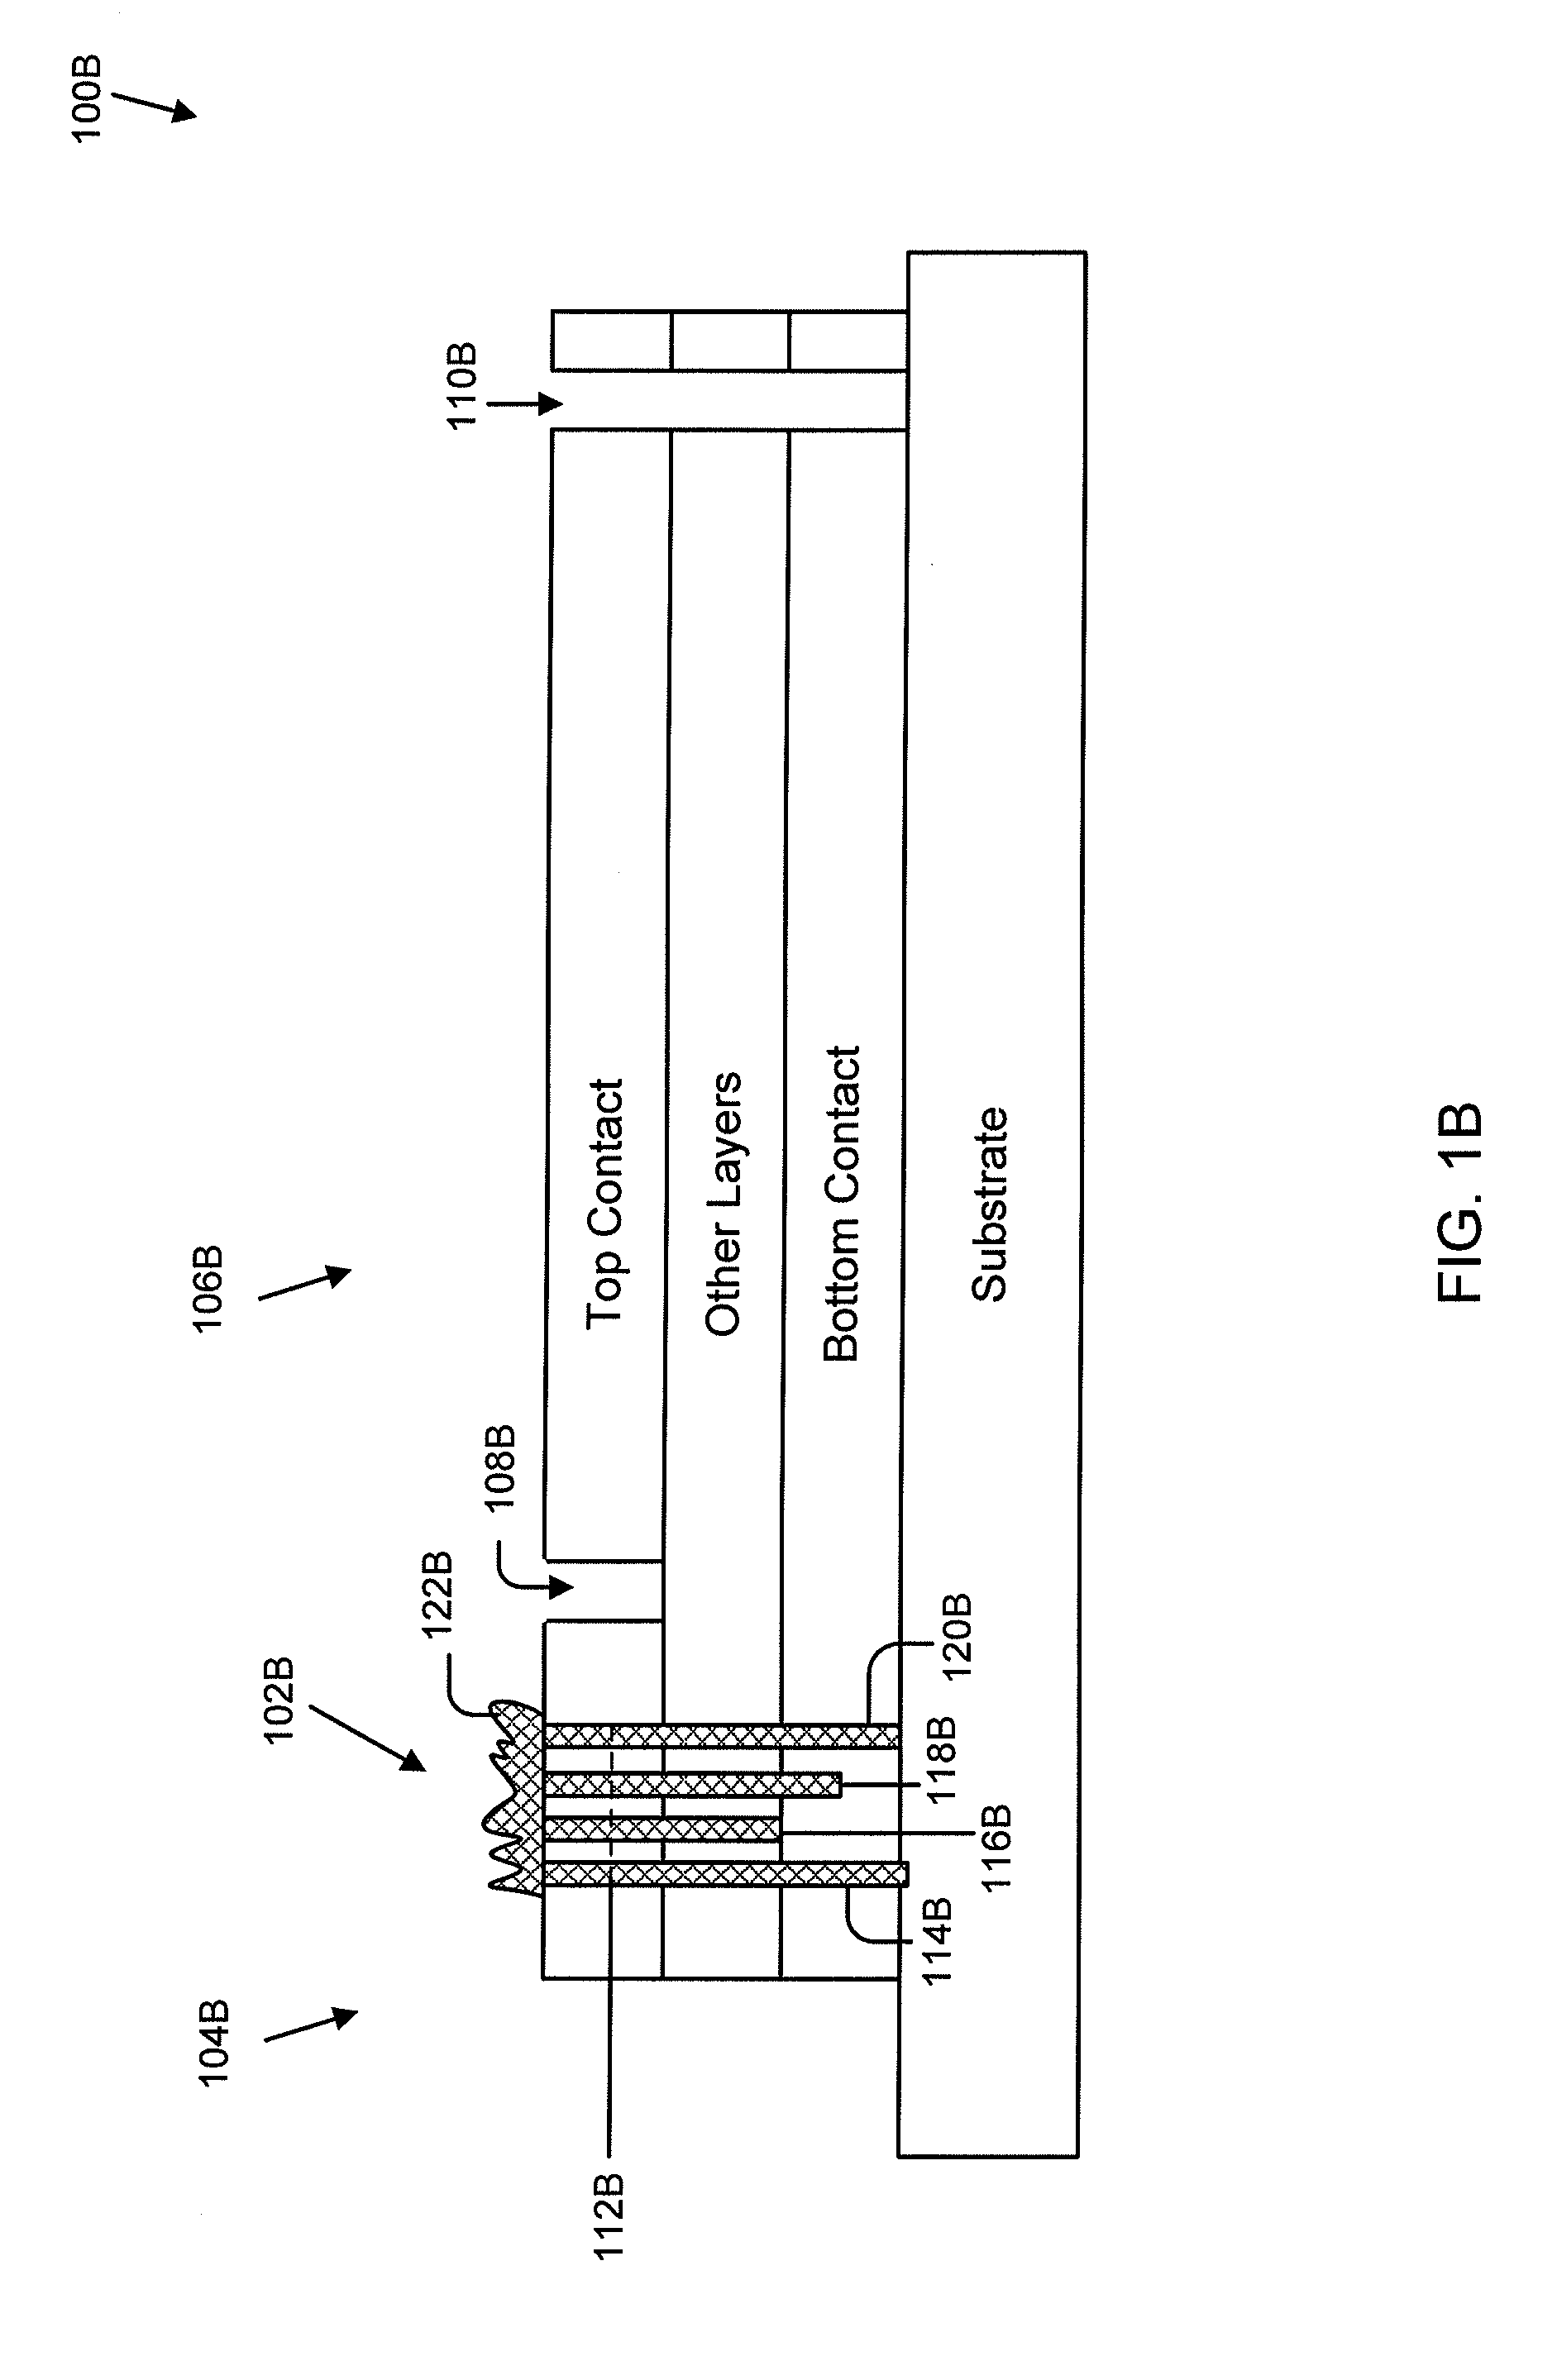 Perforation patterned electrical interconnects